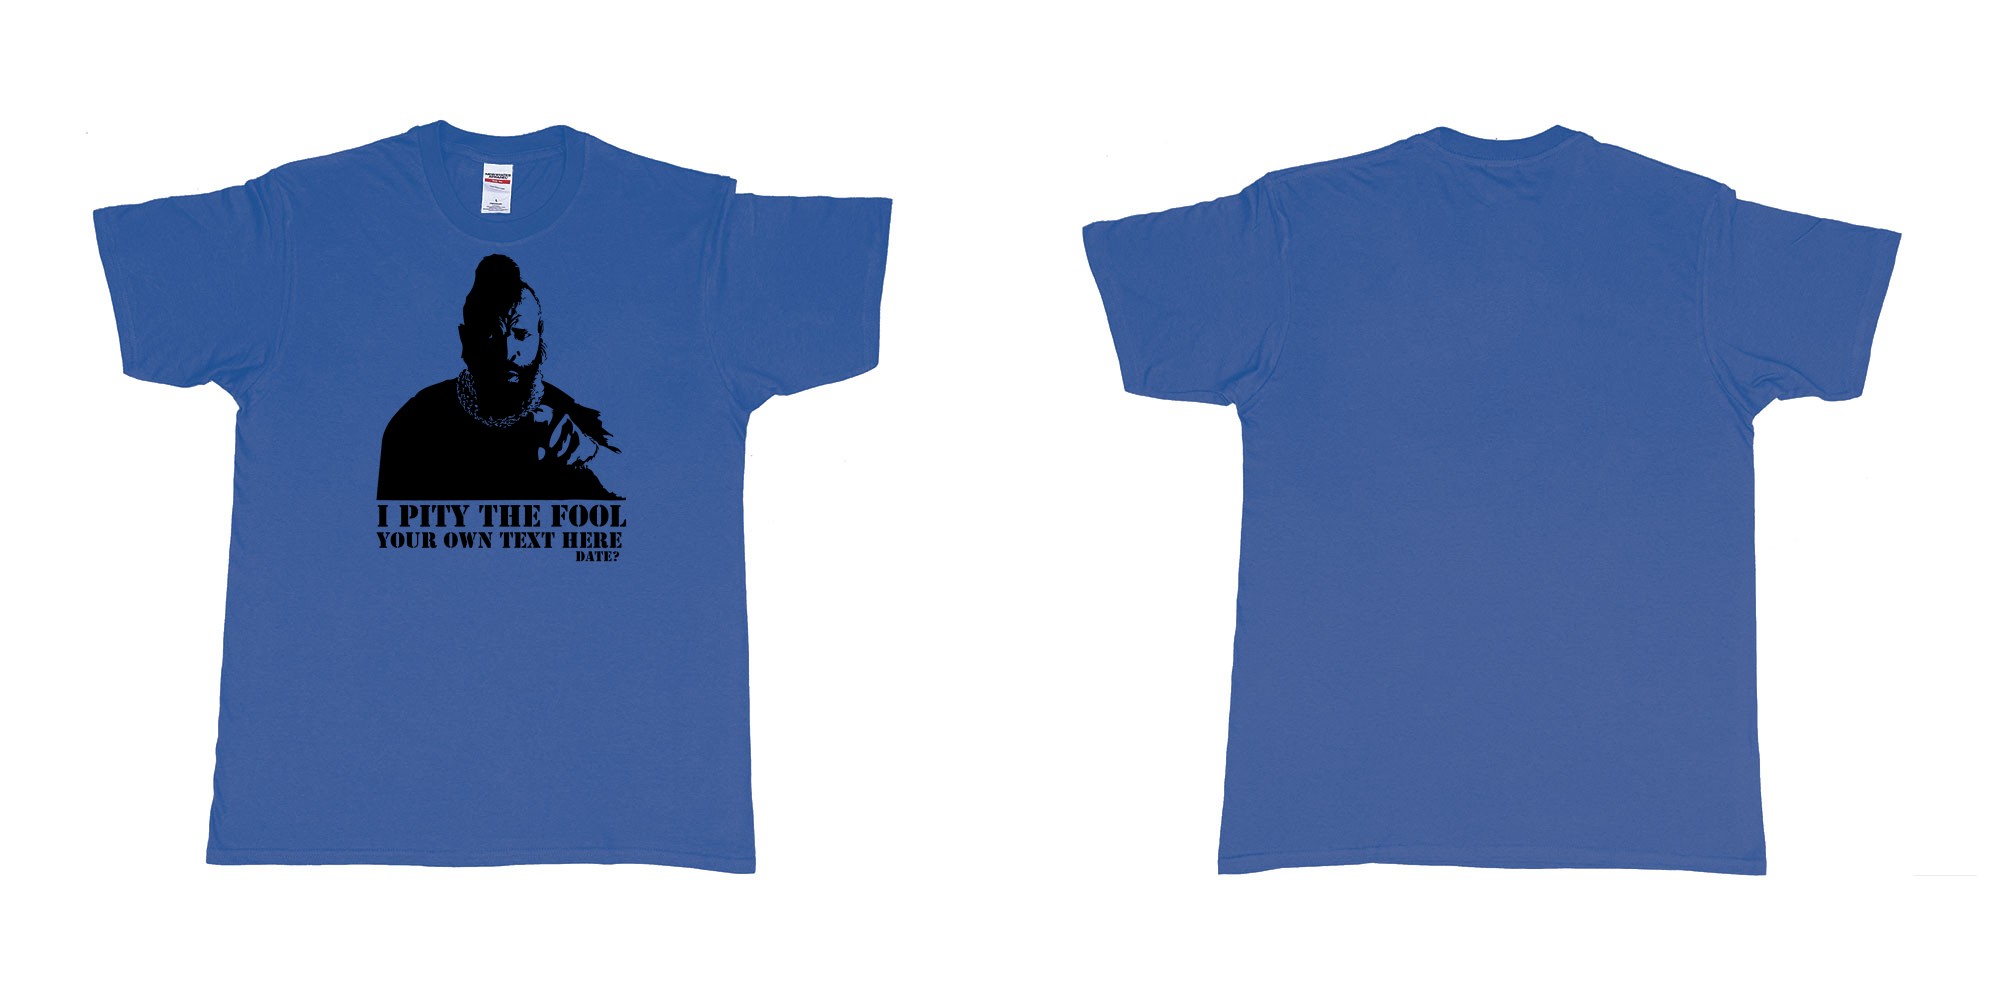 Custom tshirt design I pity the fool in fabric color royal-blue choice your own text made in Bali by The Pirate Way